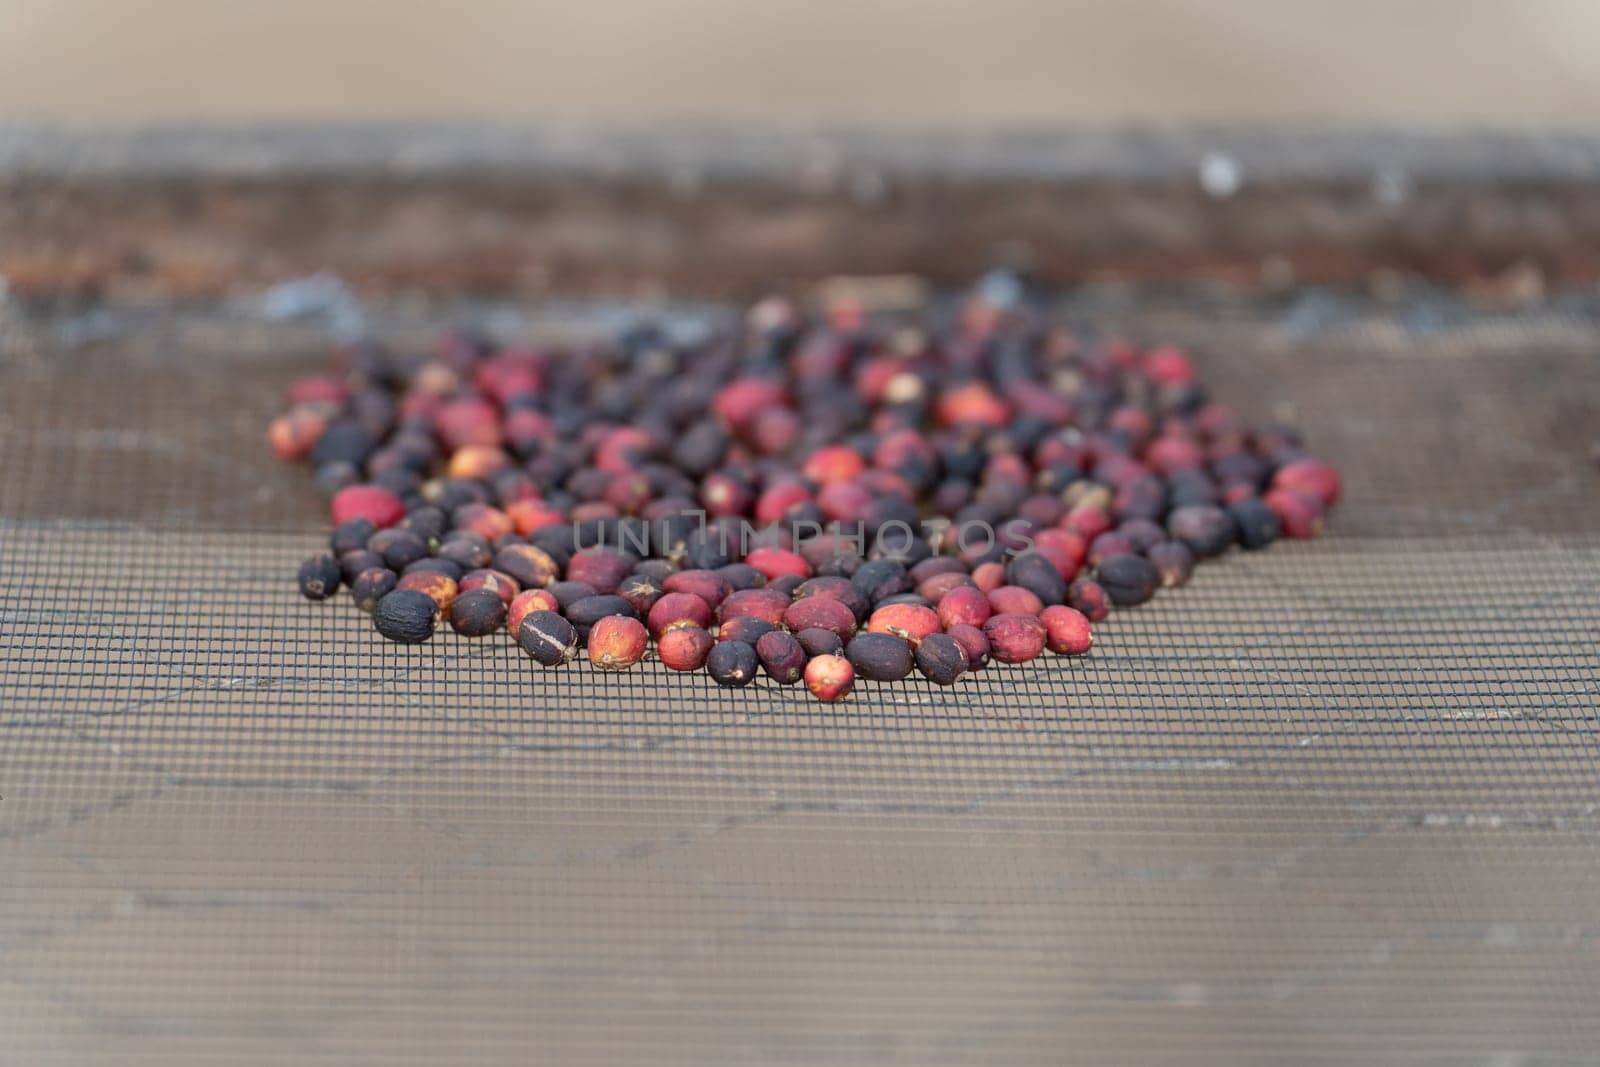 A close-up shot of a pile of red coffee berries in the drying process, showing the freshness and organic quality of the fruit.